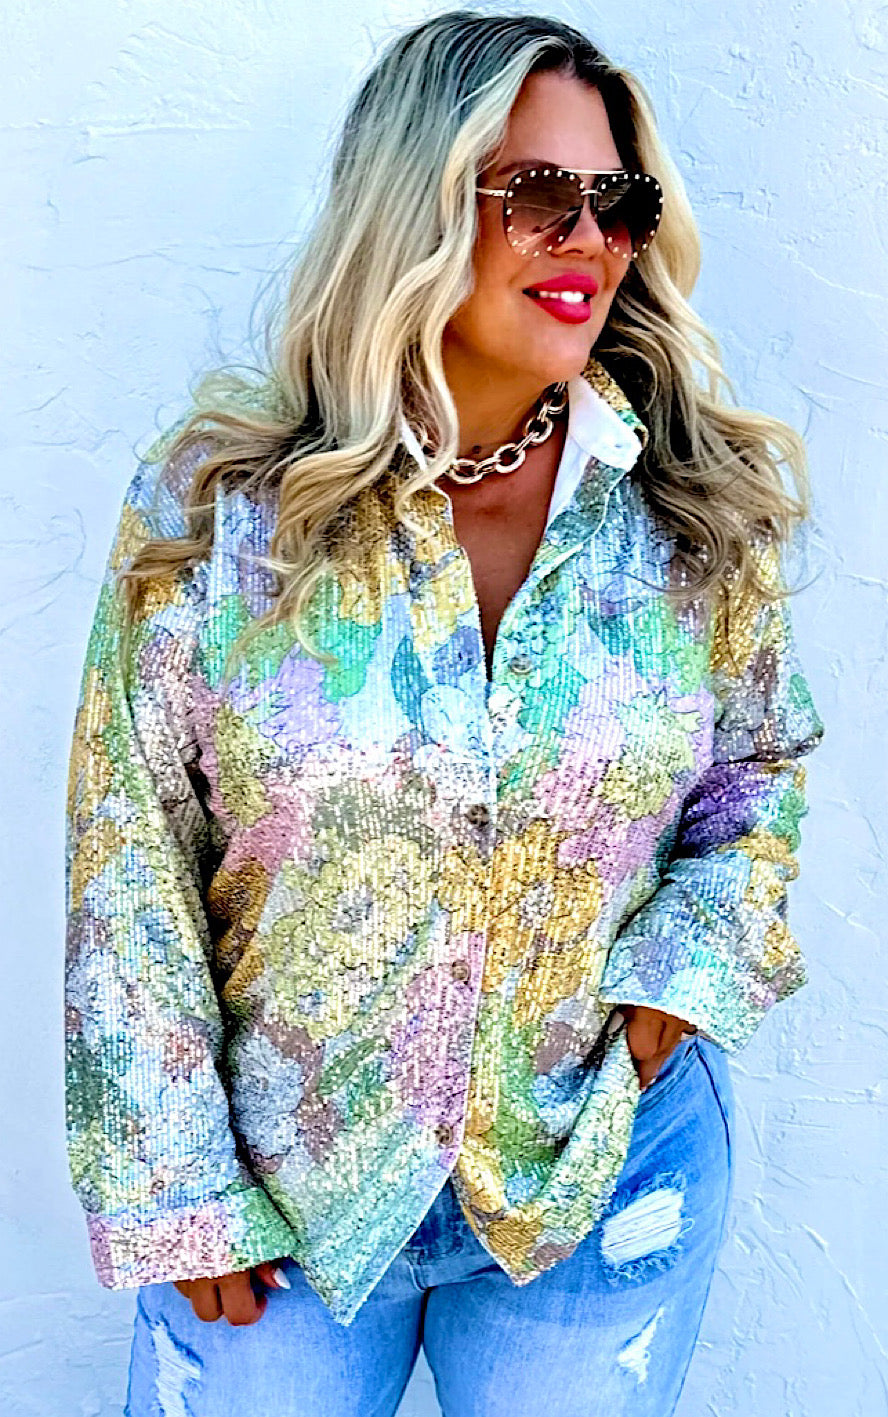 Get Your Shine On Sequin Top, L/XL left!